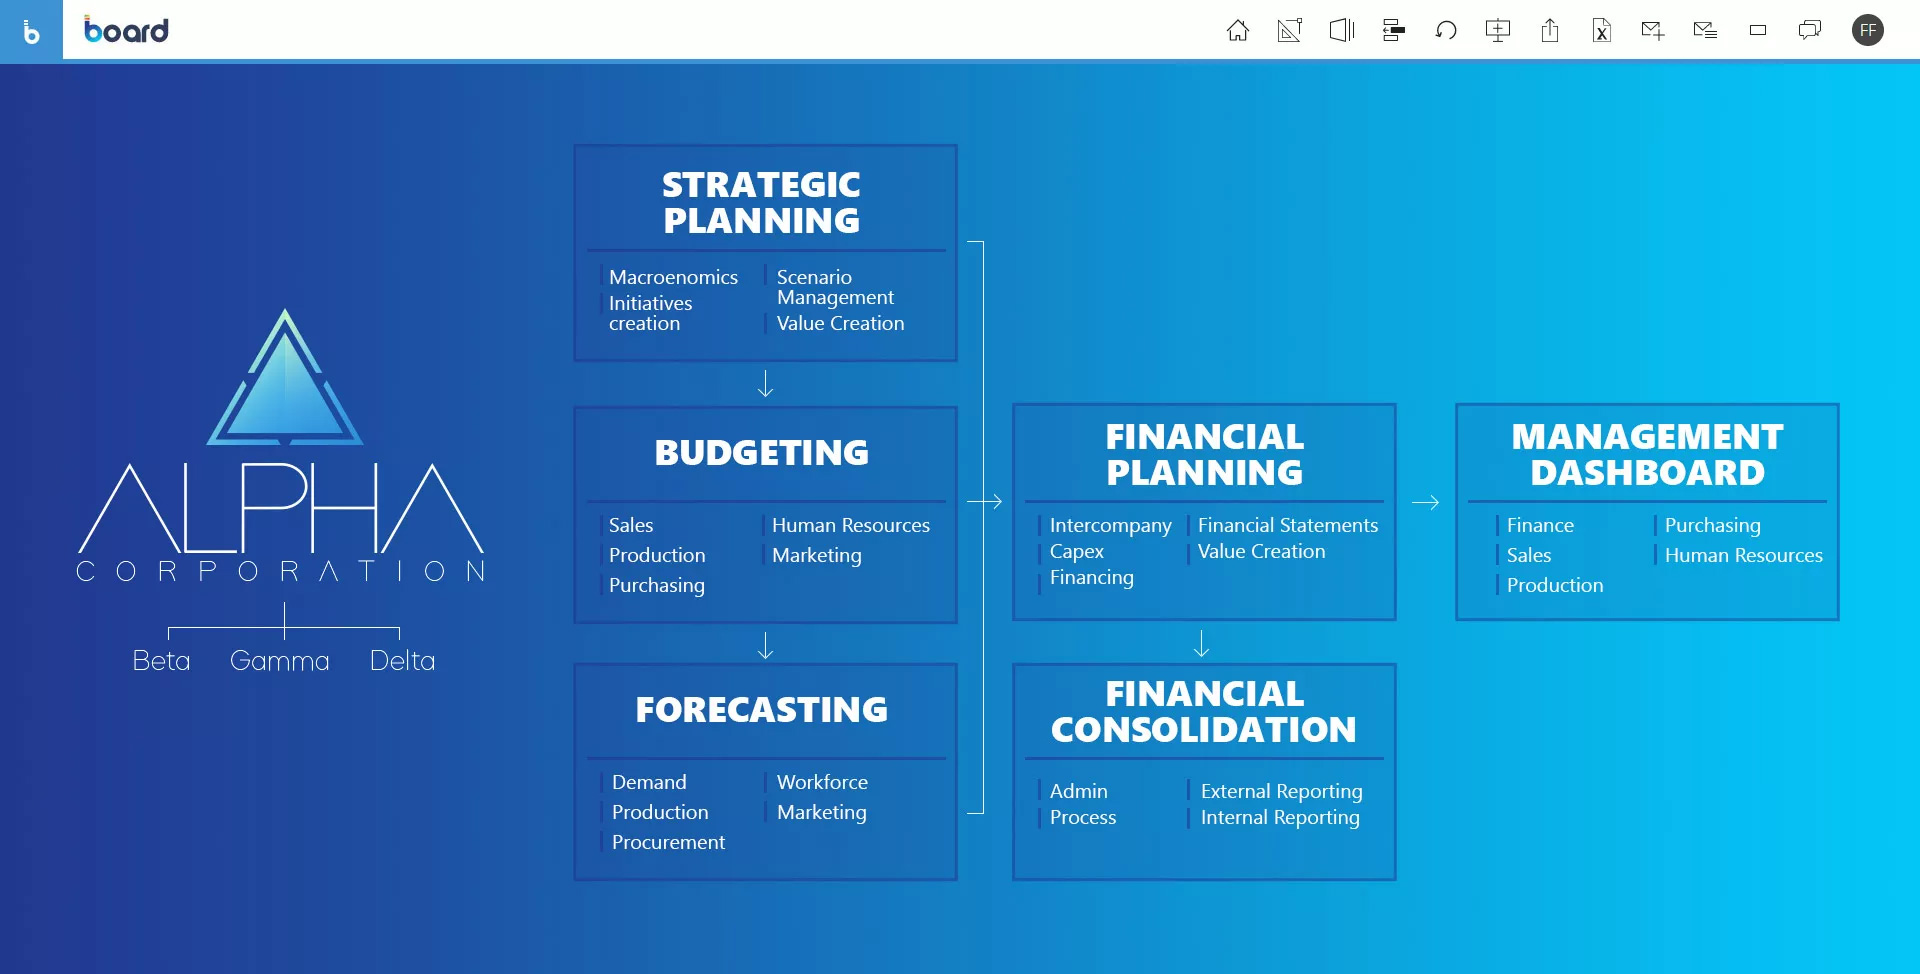 Board Integrated Business Planning